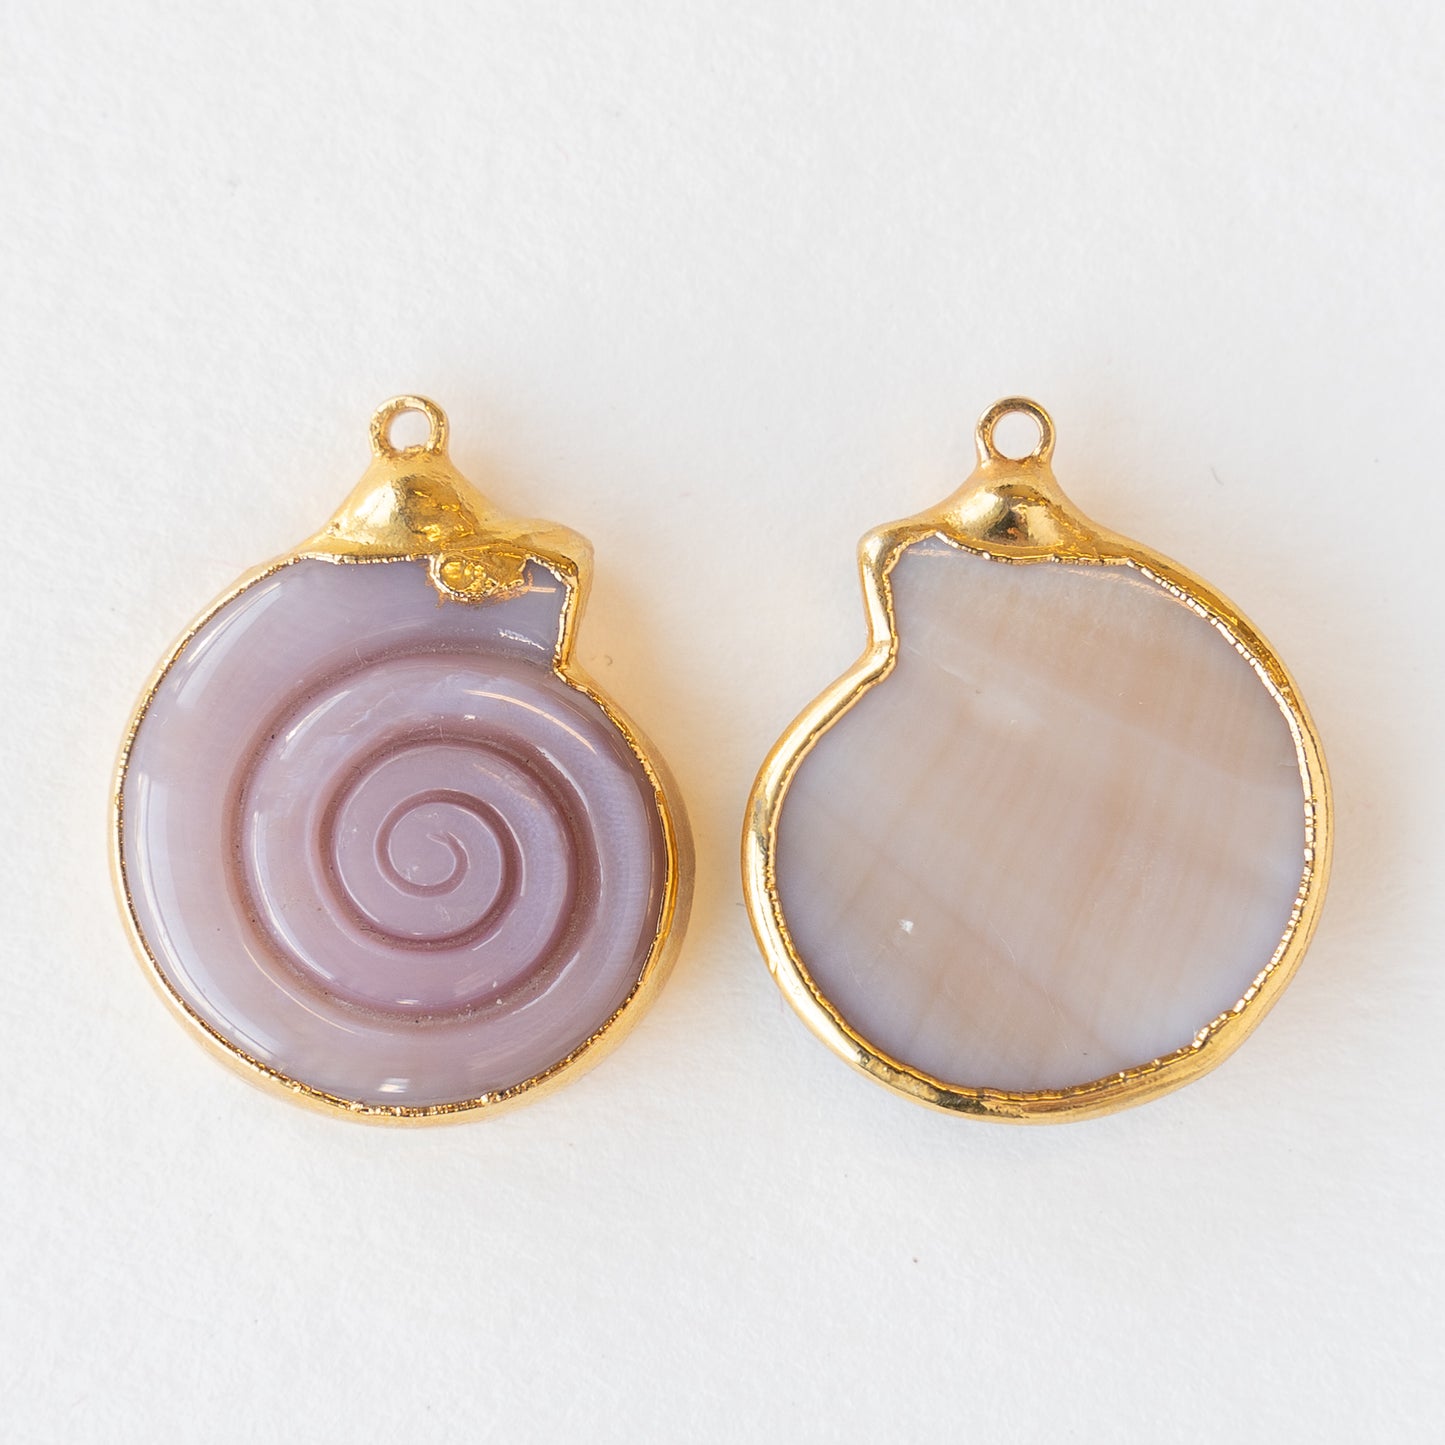 Load image into Gallery viewer, Pink Abalone Shell Pendant with 14K Gold - 1 Pendant
